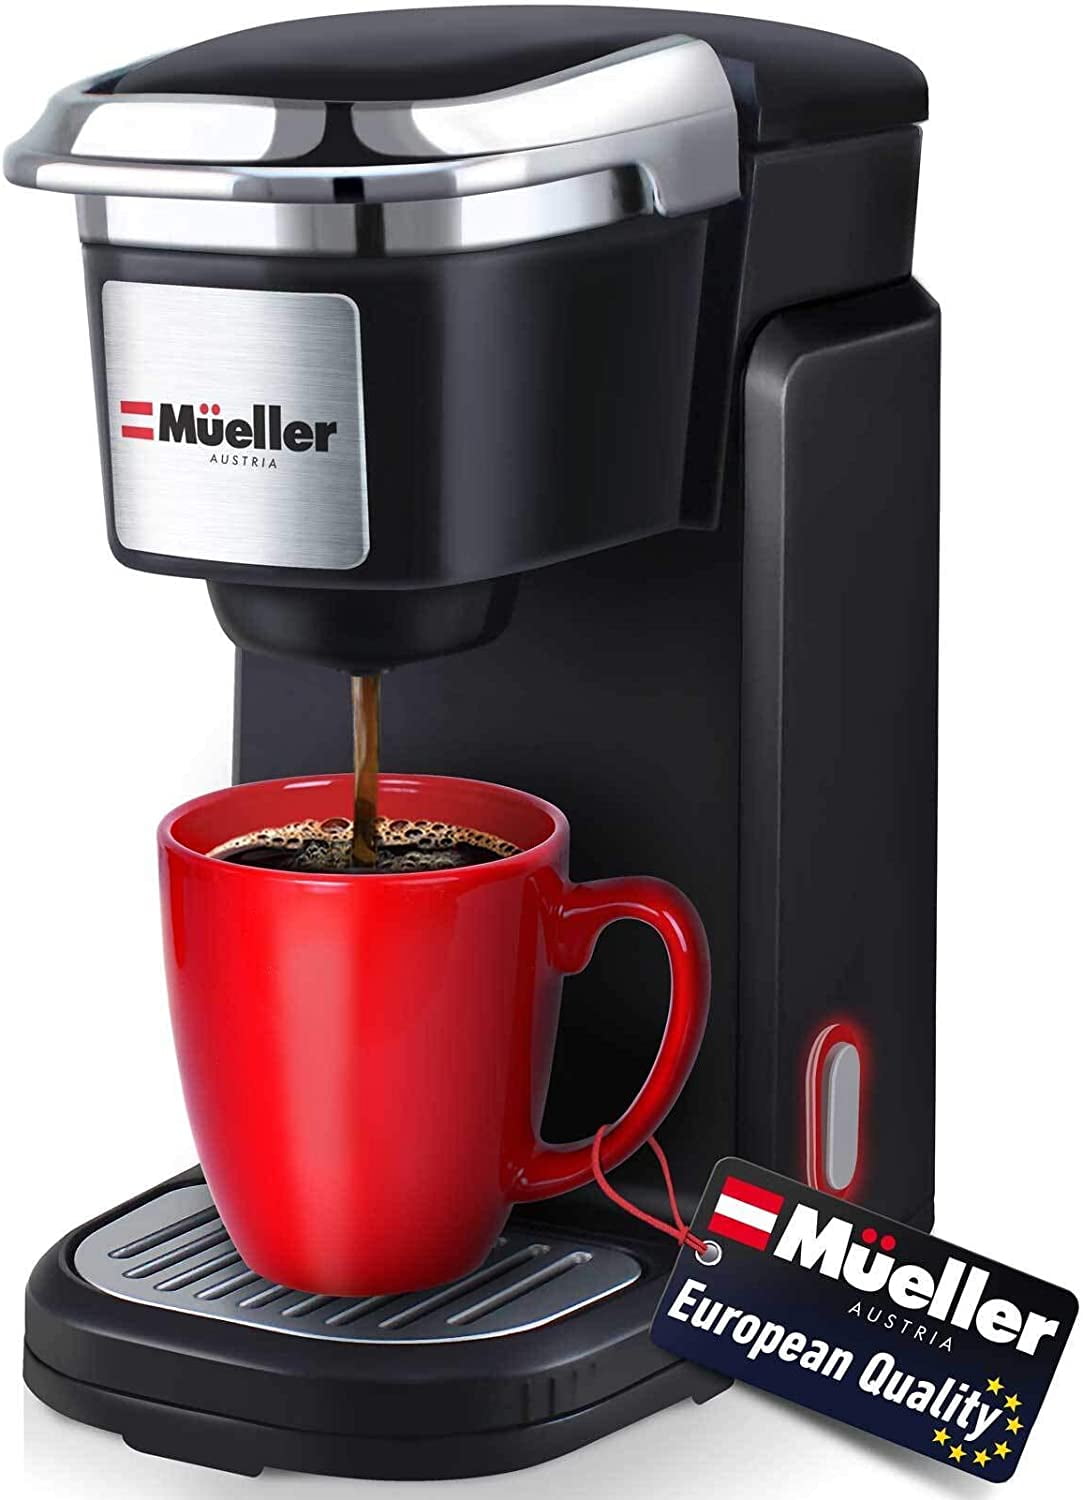 Mueller 12-Cup Drip Coffee Maker, Auto Keep Warm Function, Smart Anti-Drip  System, with Durable Permanent Filter and Borosilicate Glass Carafe, Clear